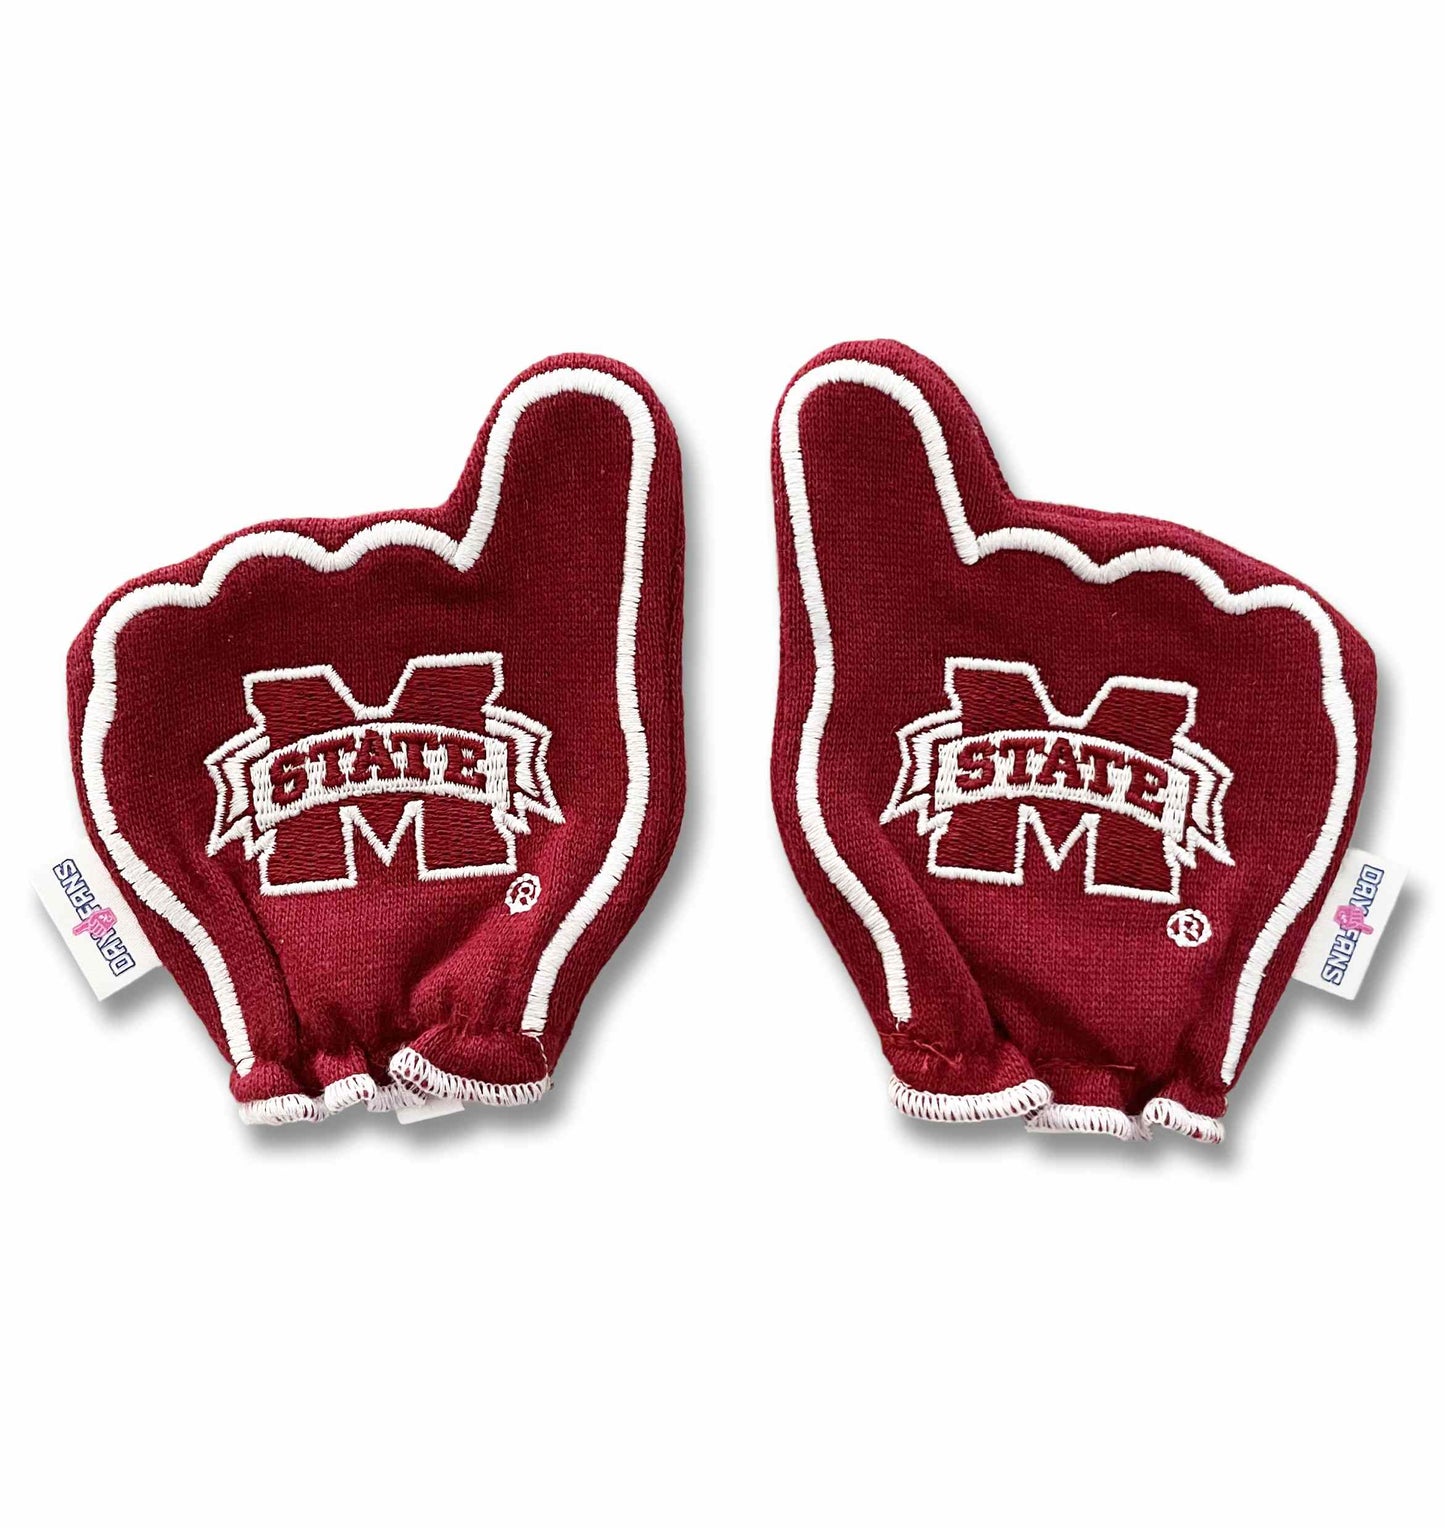 Mississippi State Hail State FanMitts Baby Mittens Maroon Back Pair